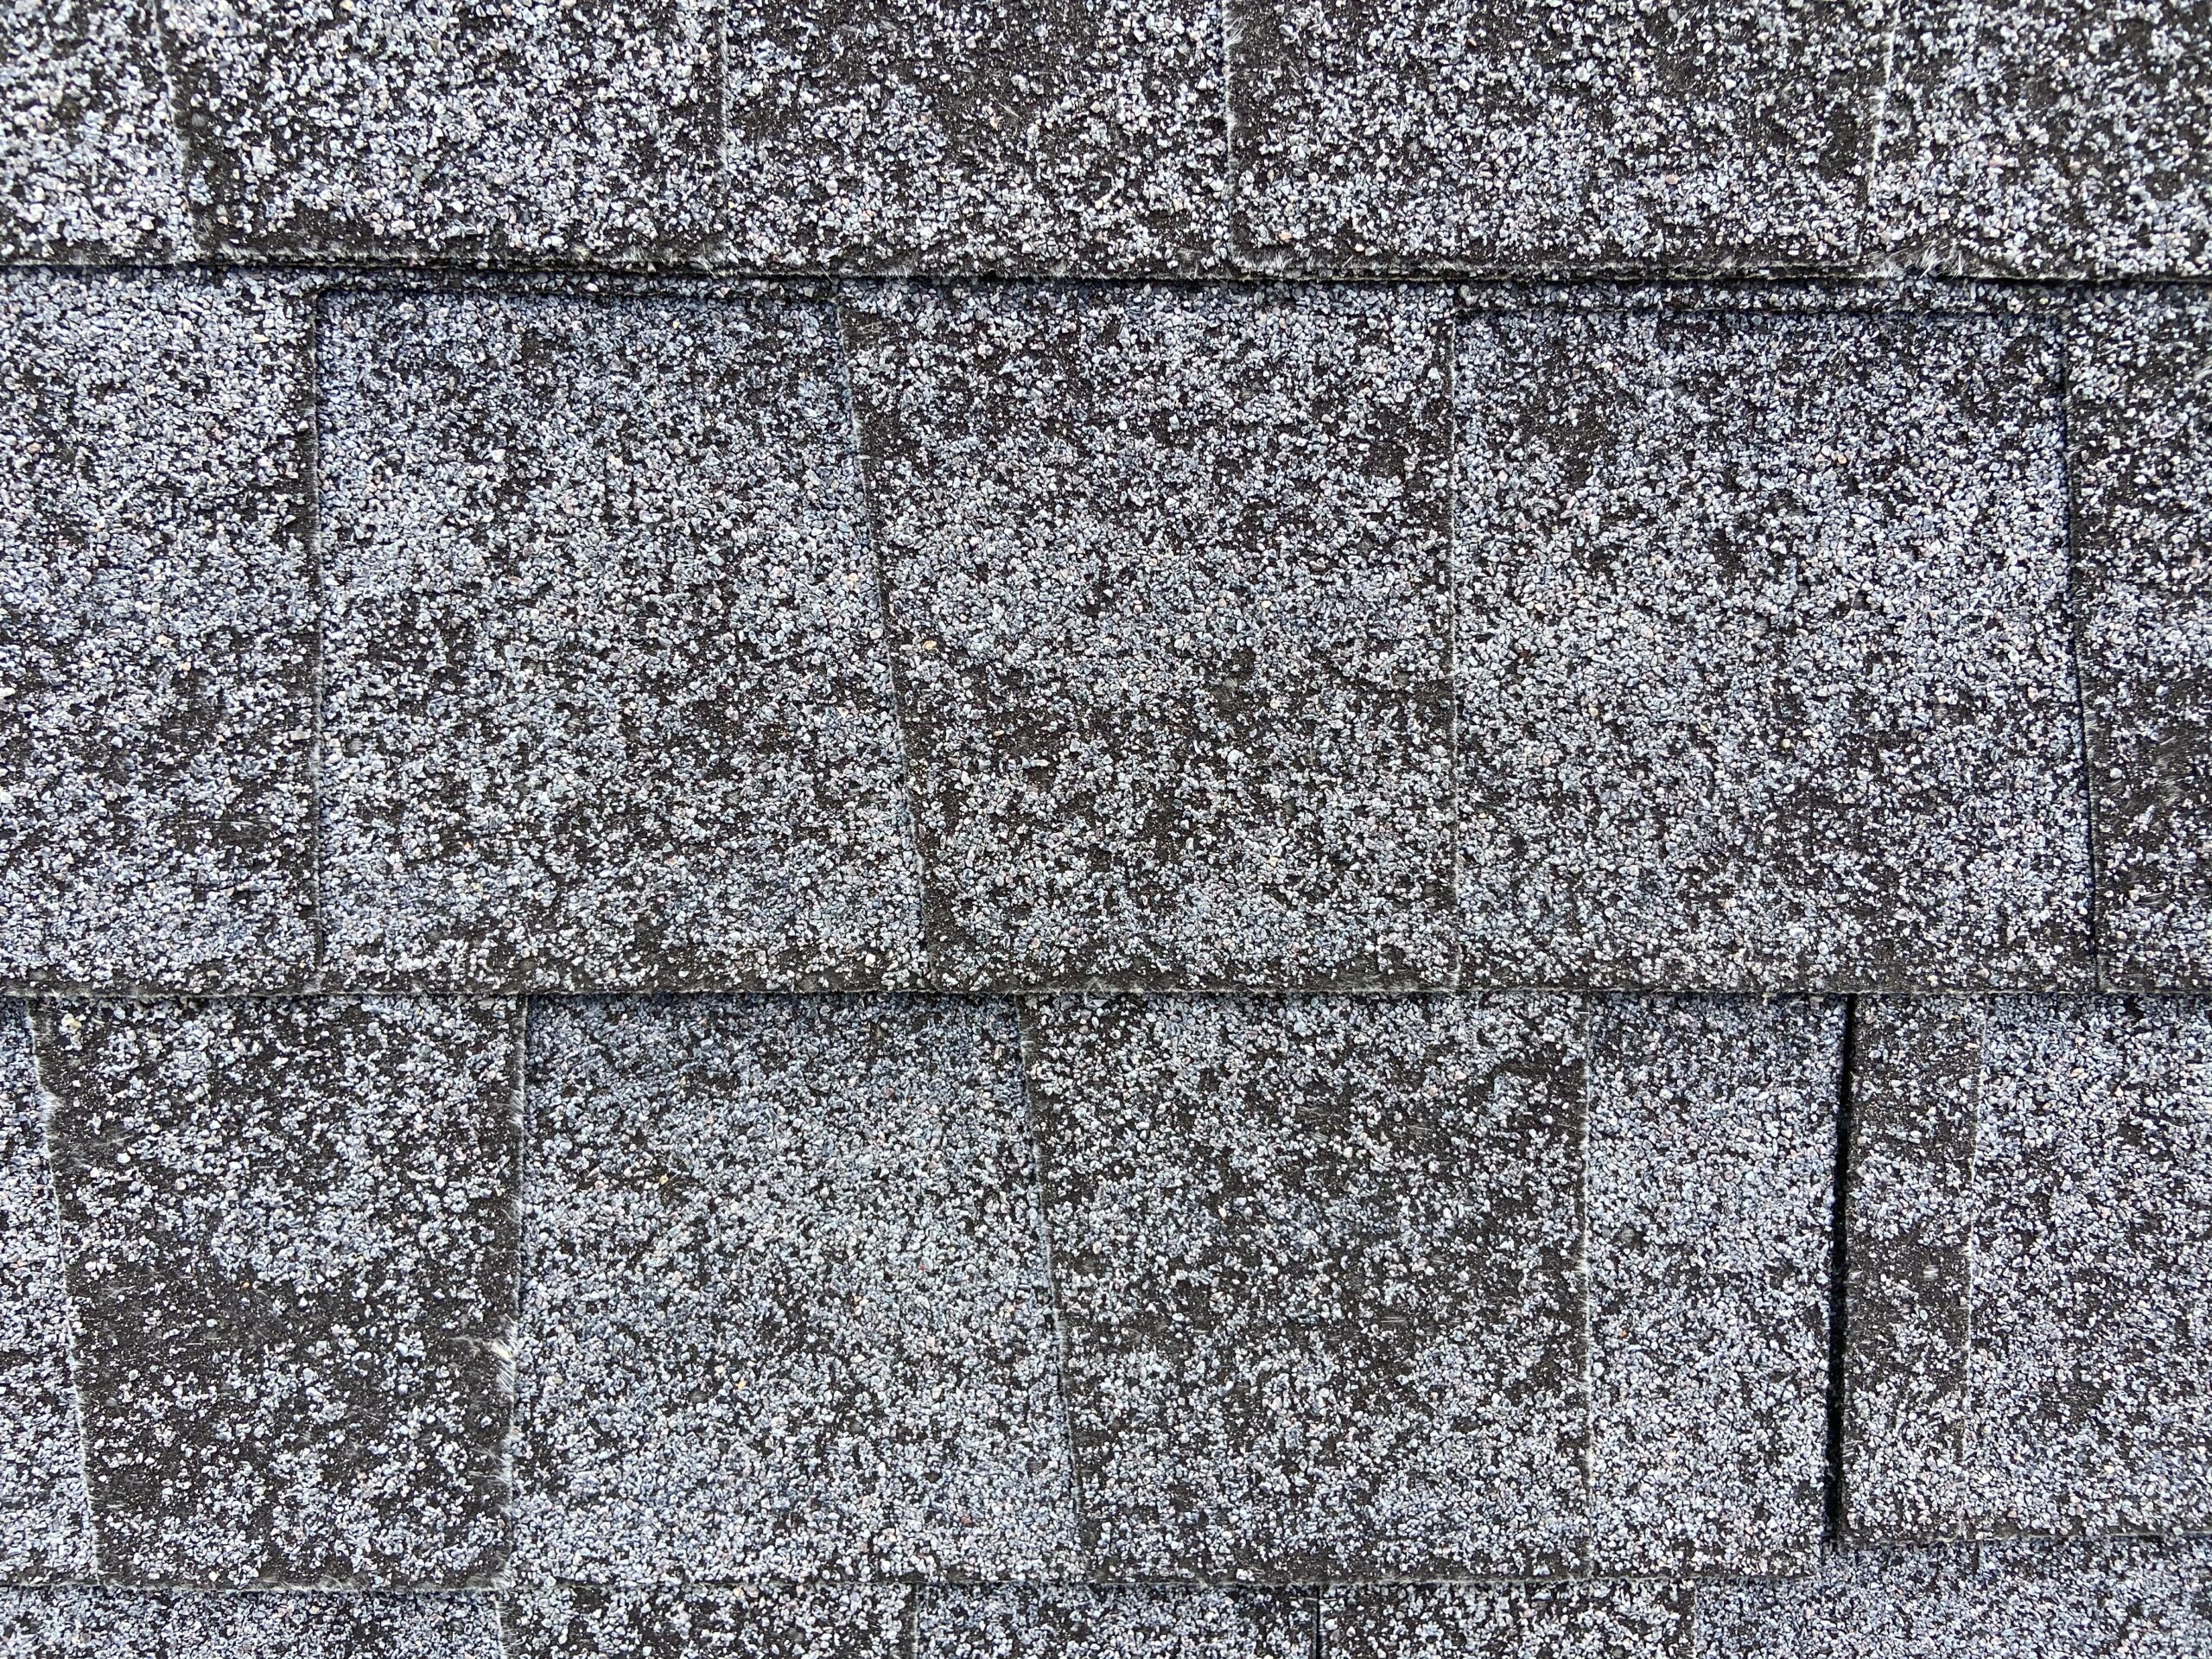 This is a picture of dimensional shingles are in bad shape and show approximately 80 to 90% granular loss.